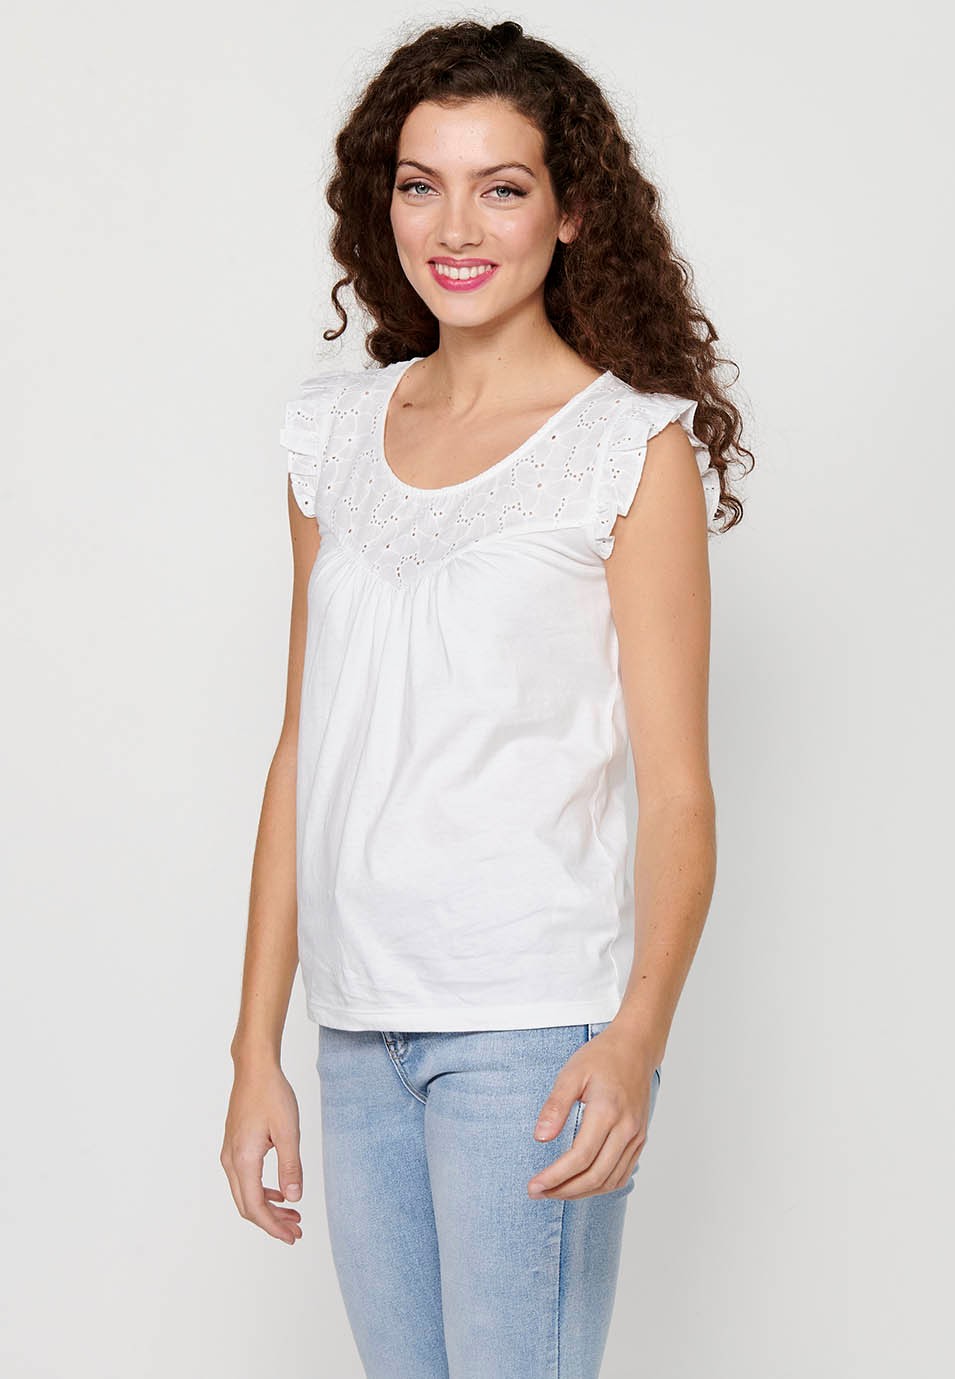 Women's White Round Neck Short Sleeve T-shirt with Ruffle on the Shoulders 7